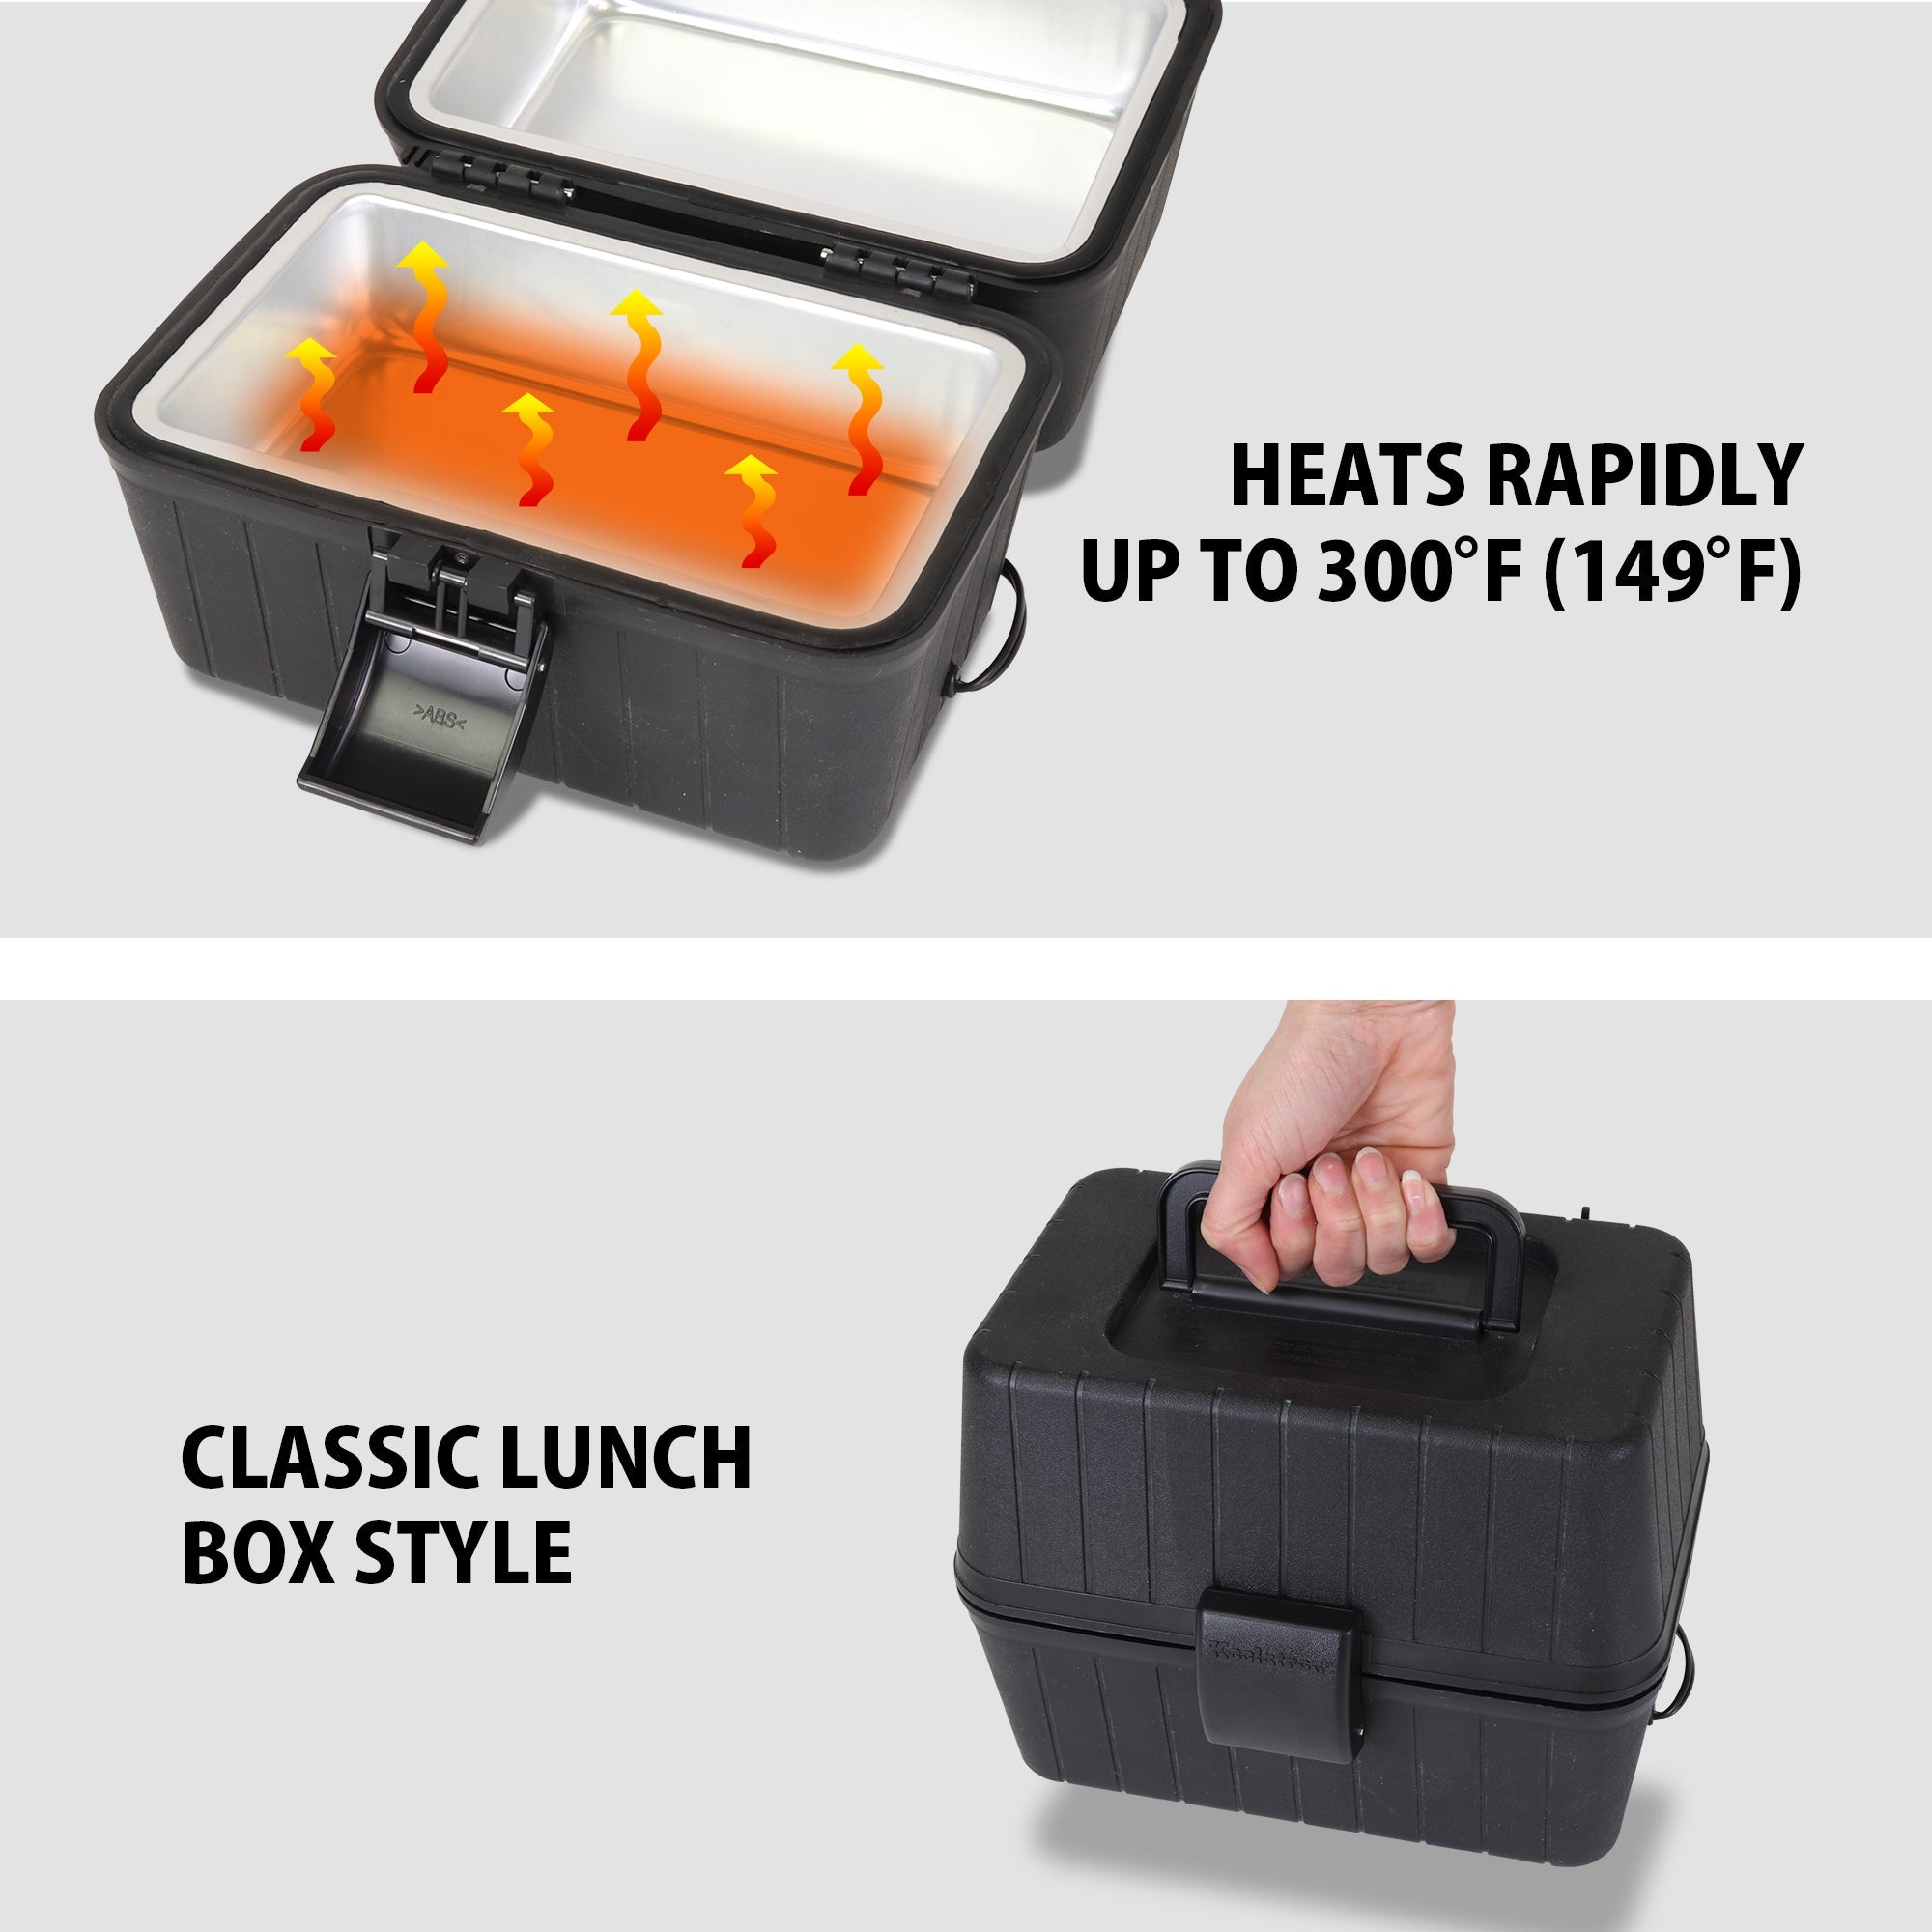 Top half shows an enhanced image of the 12V lunch box heater, open, with orange arrows inside and text to the right reading, "Heats rapidly up to 300F (149C)." Bottom half shows a product shot of a person's hand holding the handle of the closed lunch box stove with text to the left reading, "classic lunch box style"